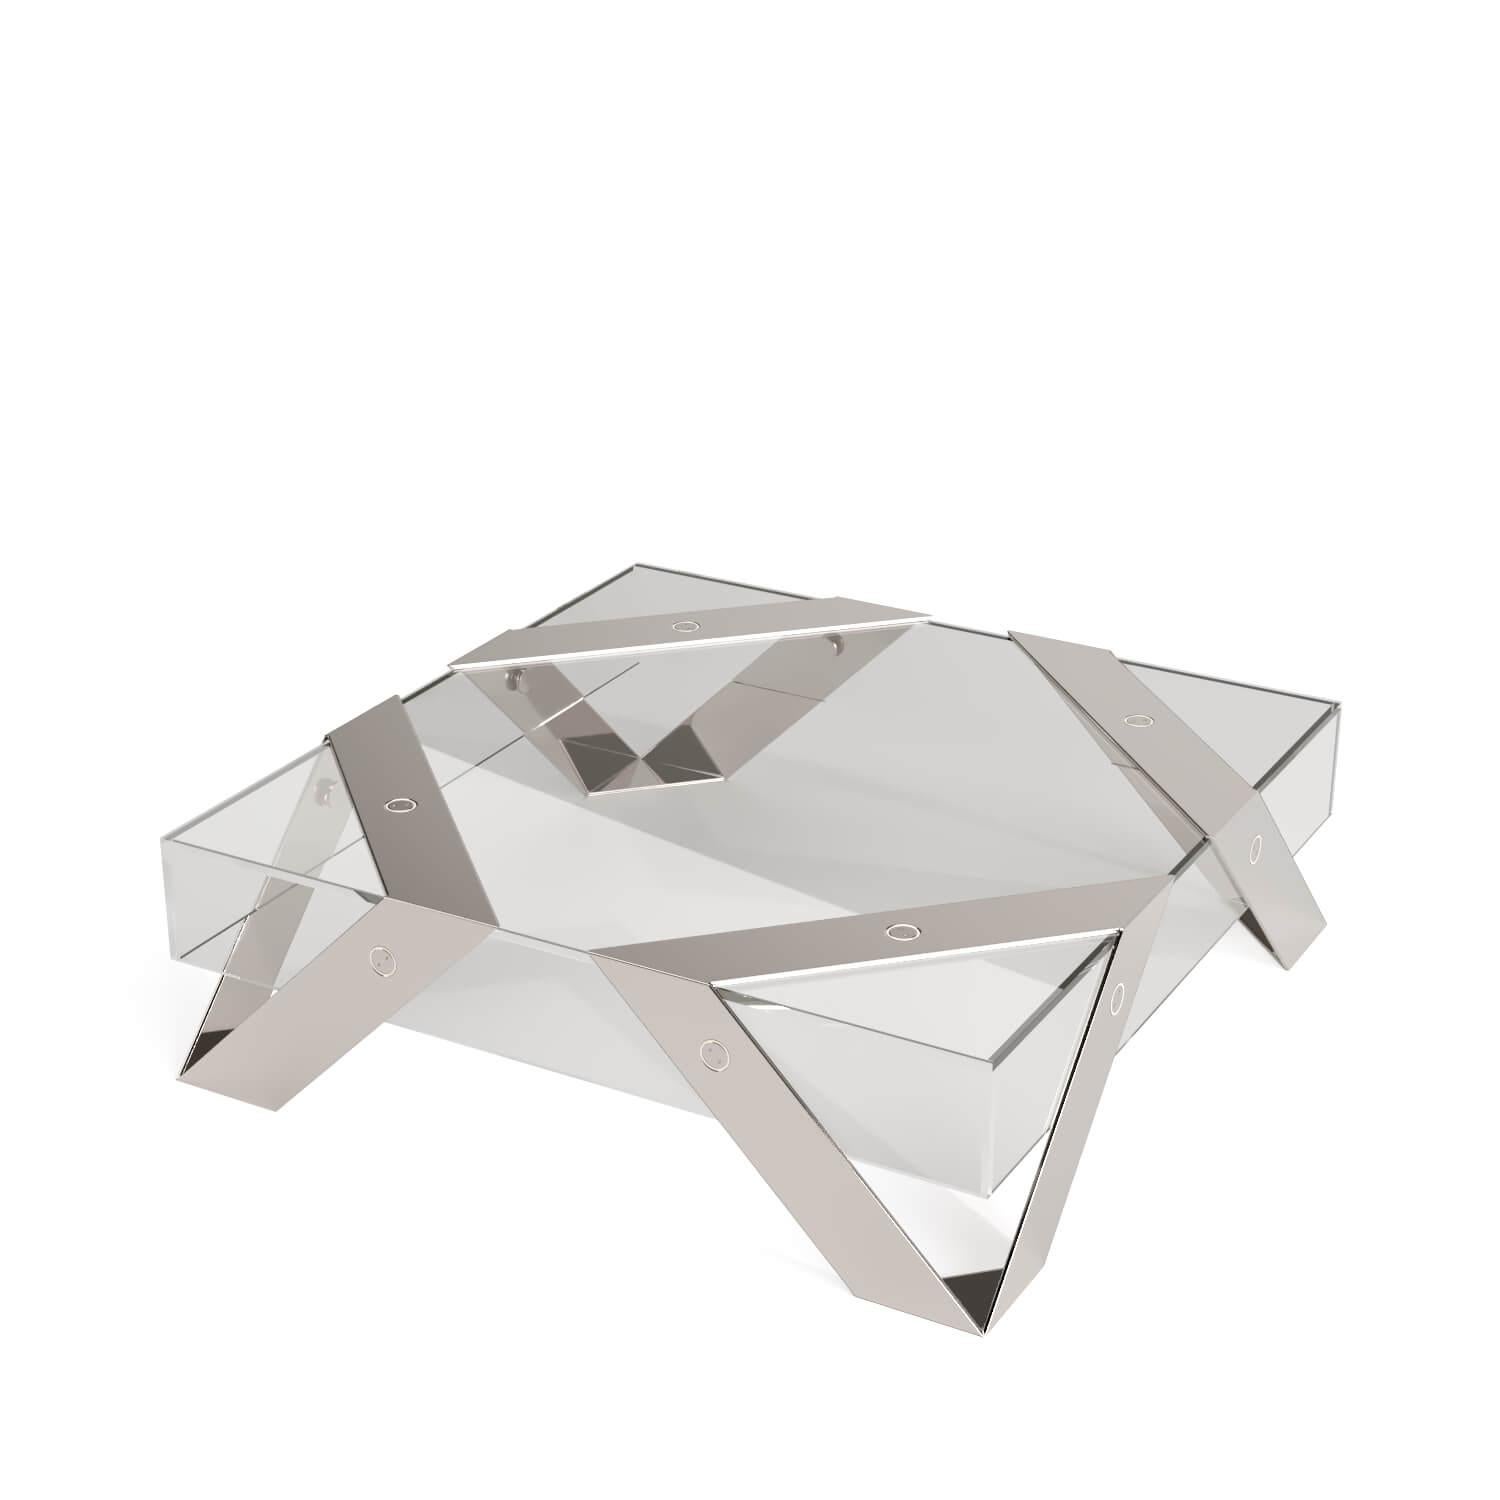 Portuguese Modern Minimalist Square Center Coffee Table Tempered Glass and Stainless Steel For Sale